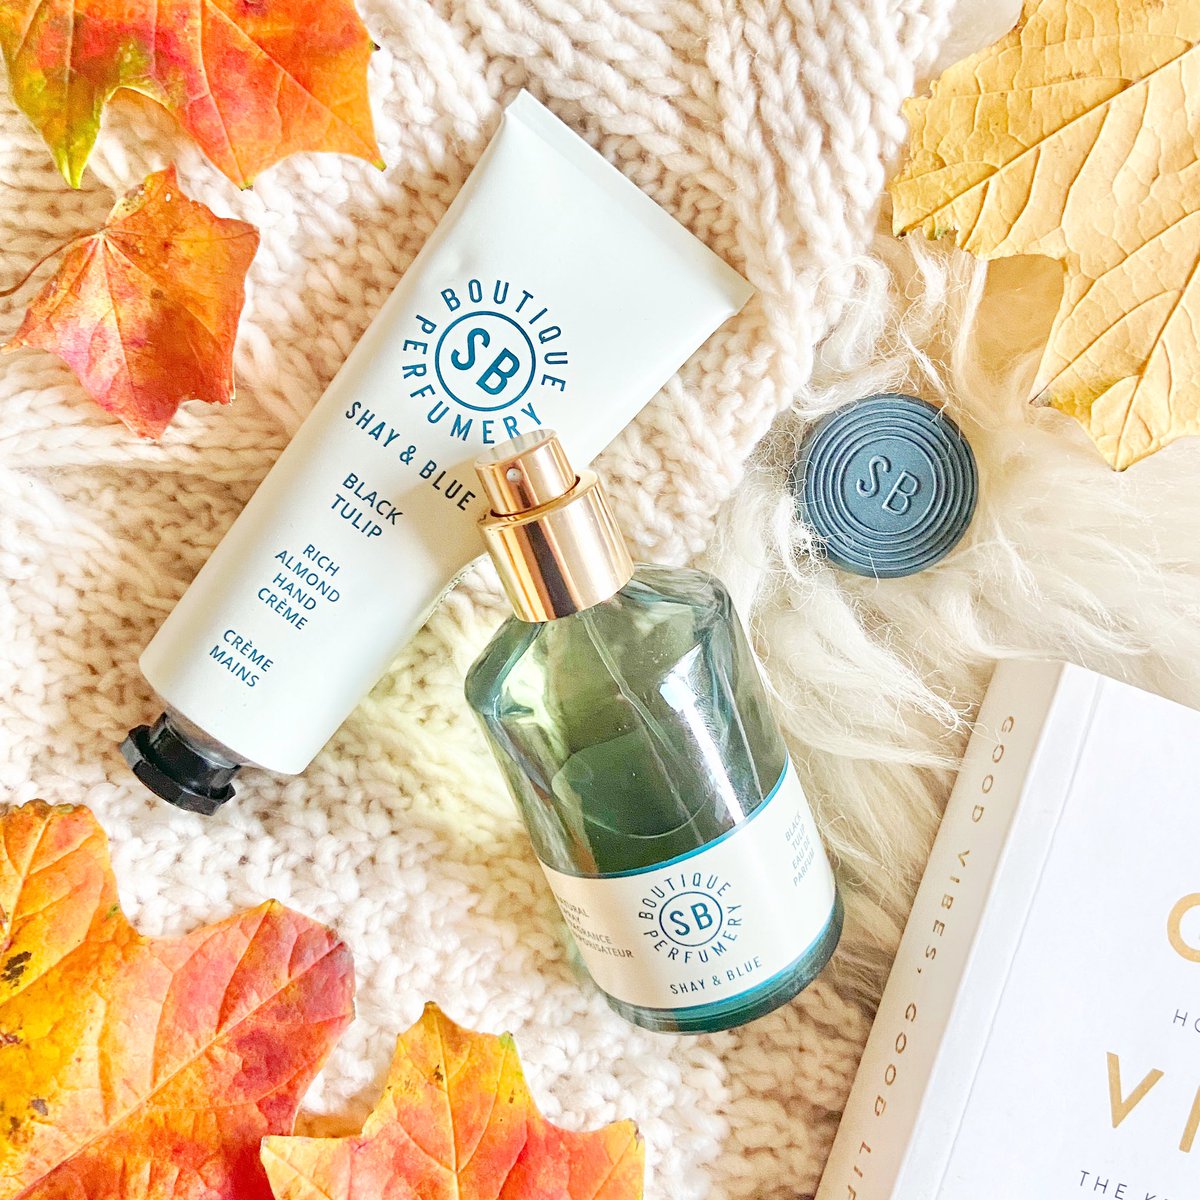 I’m loving @ShayandBlue “Black Tulip” - a rich floral/woody type of scent which I think is great for autumn 🍁 I love it so much that I bought a set of perfume + hand creme from @qvcuk 😍 🏷 #ShayAndBlue #ShayAndBlueLondon #SBxMe @domdevetta #CrueltyFree #QVCUK